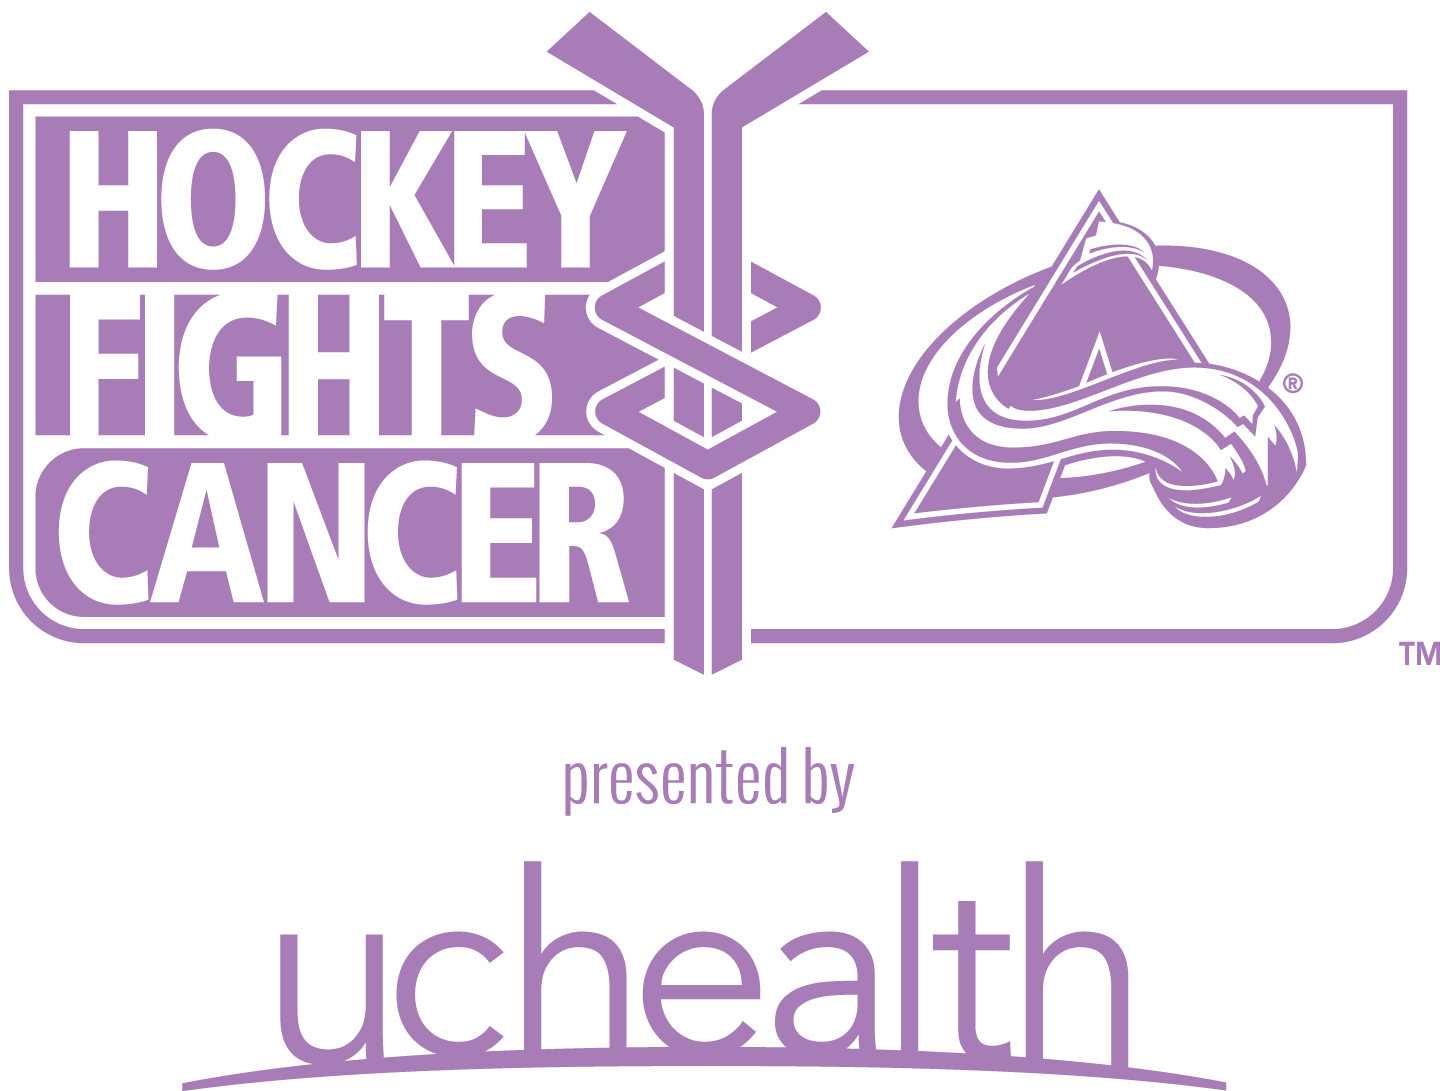 avalanche hockey fights cancer